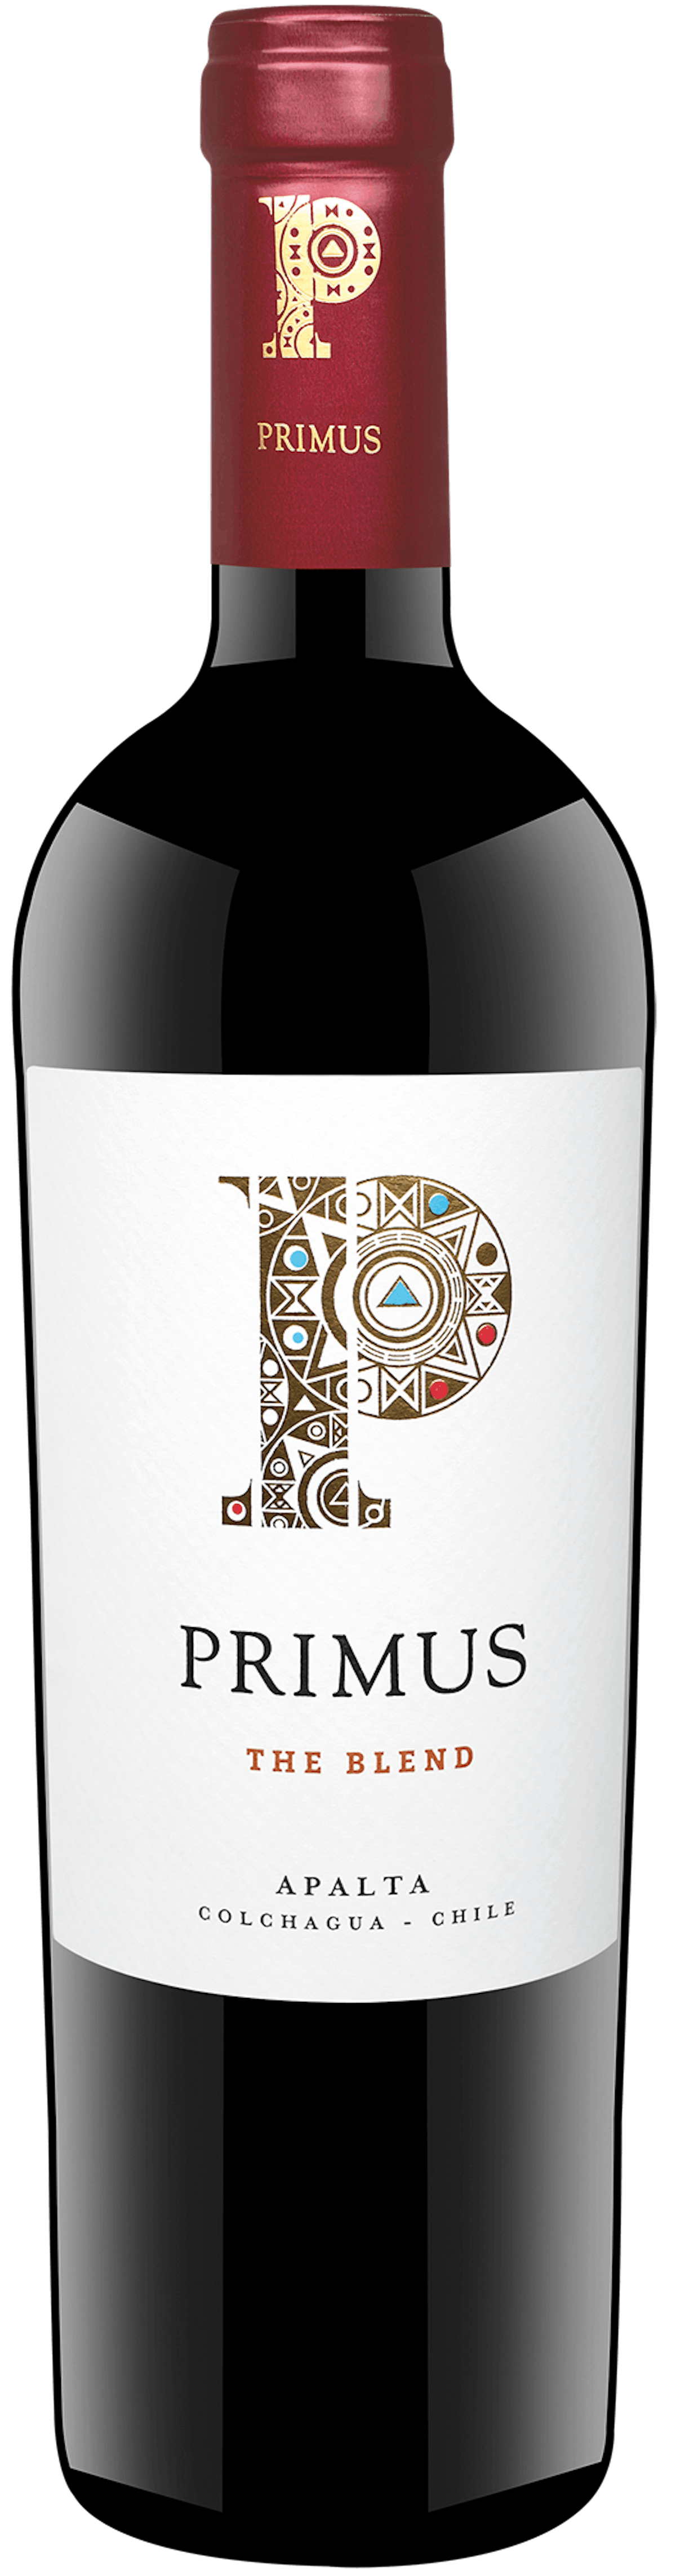 Primus Blend of Colchagua Valley